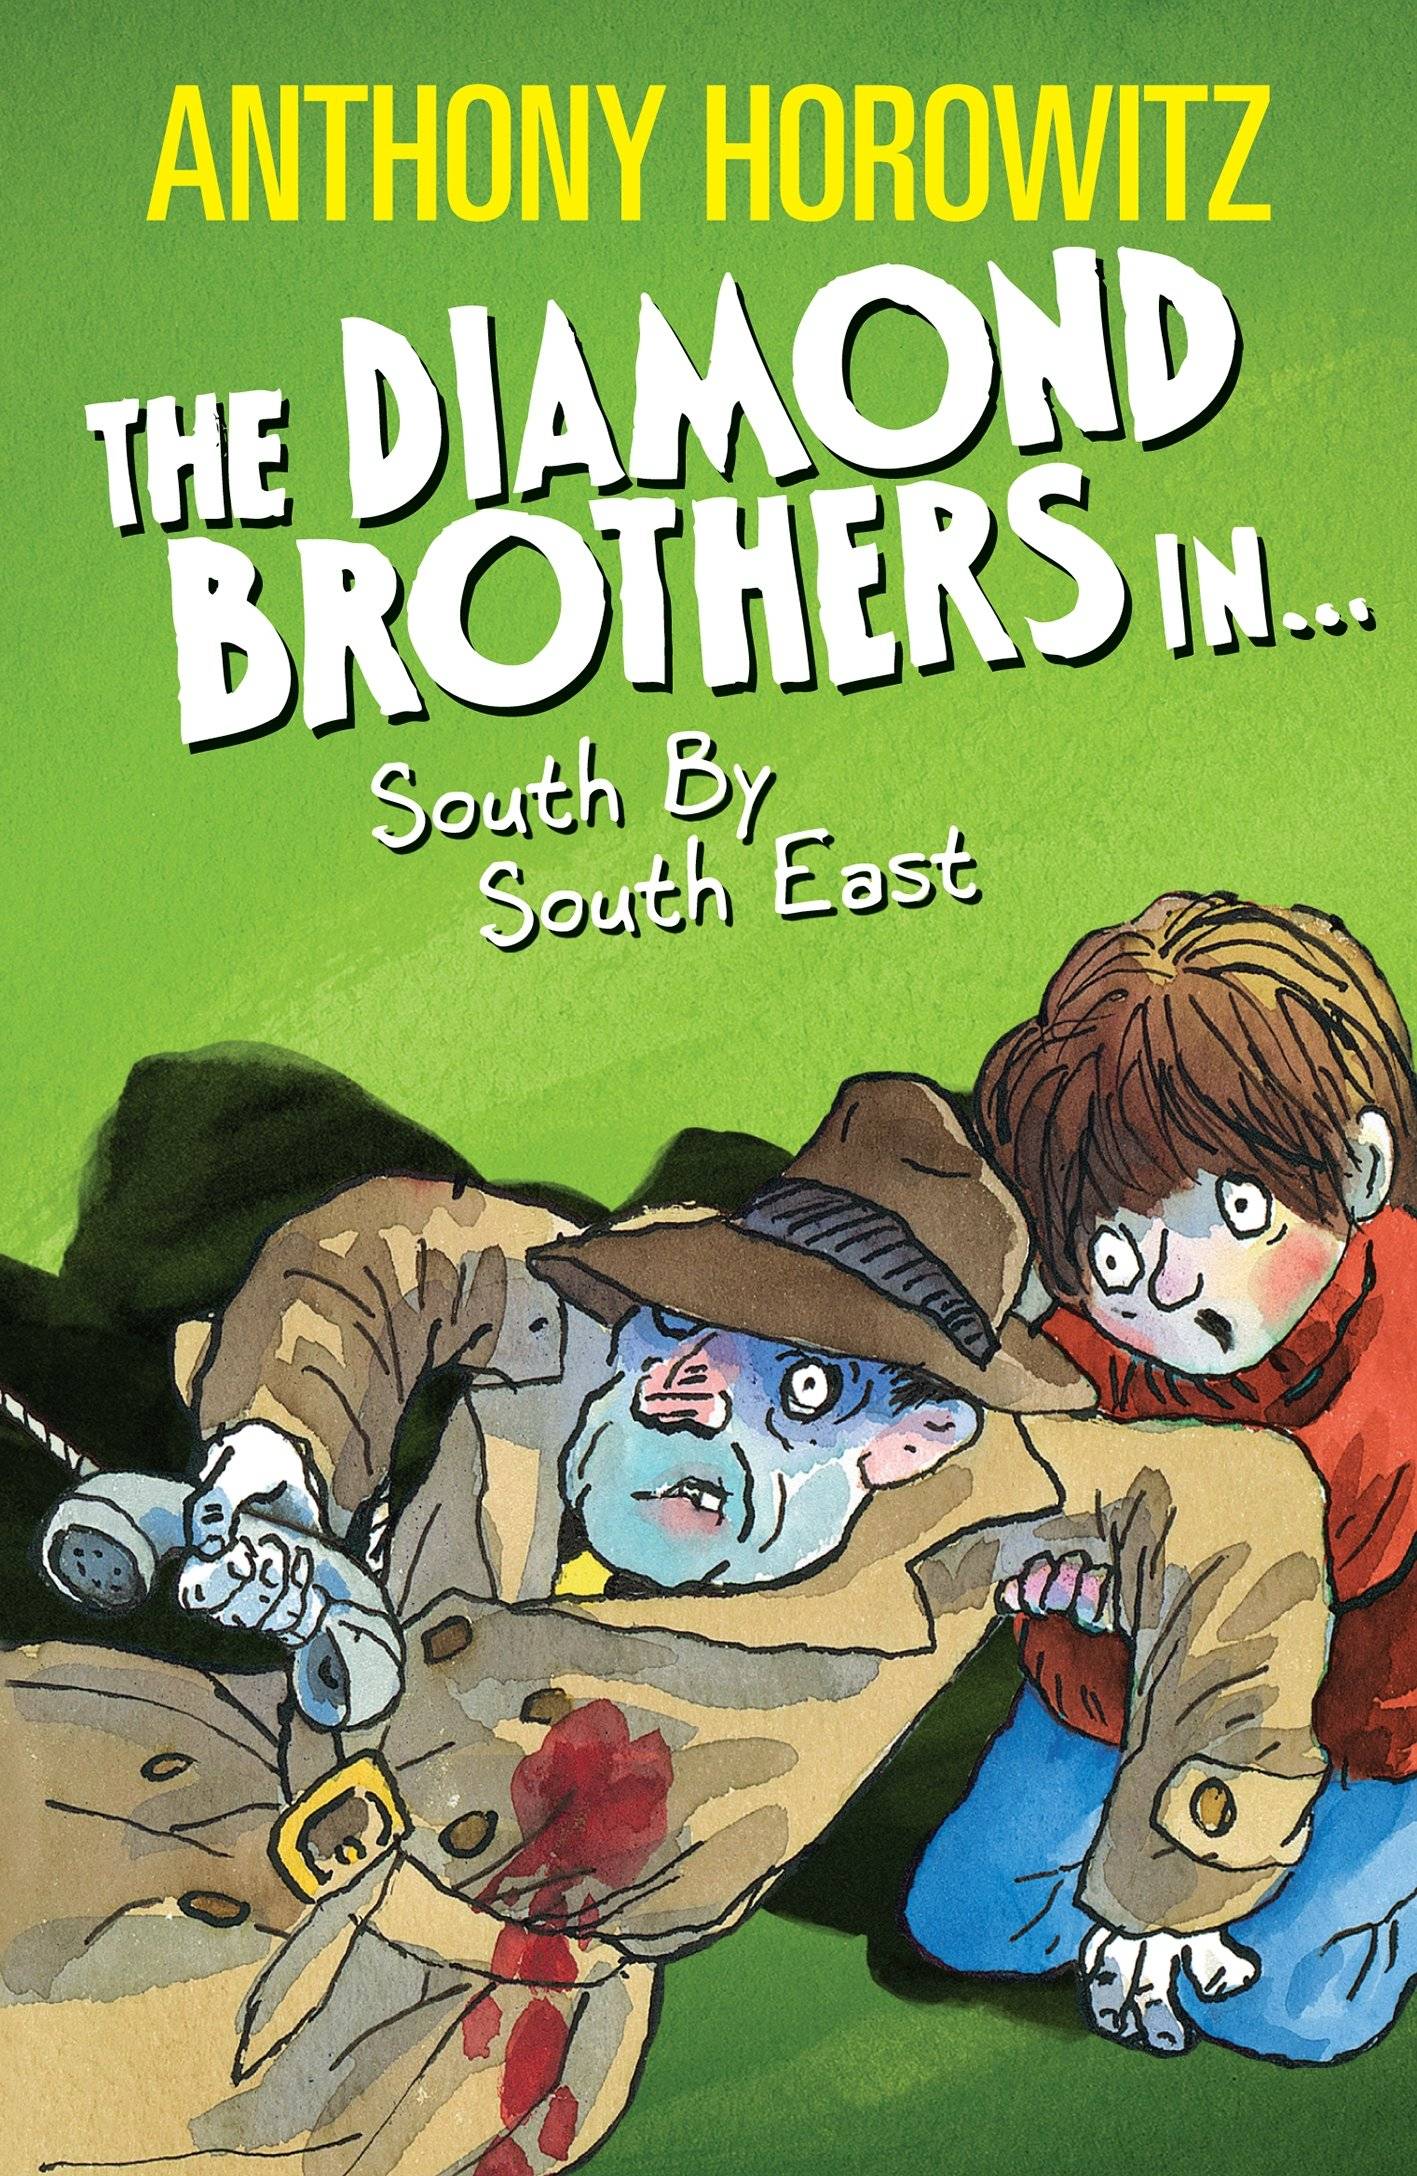 IMG : The Diamond Brothers in South by south East